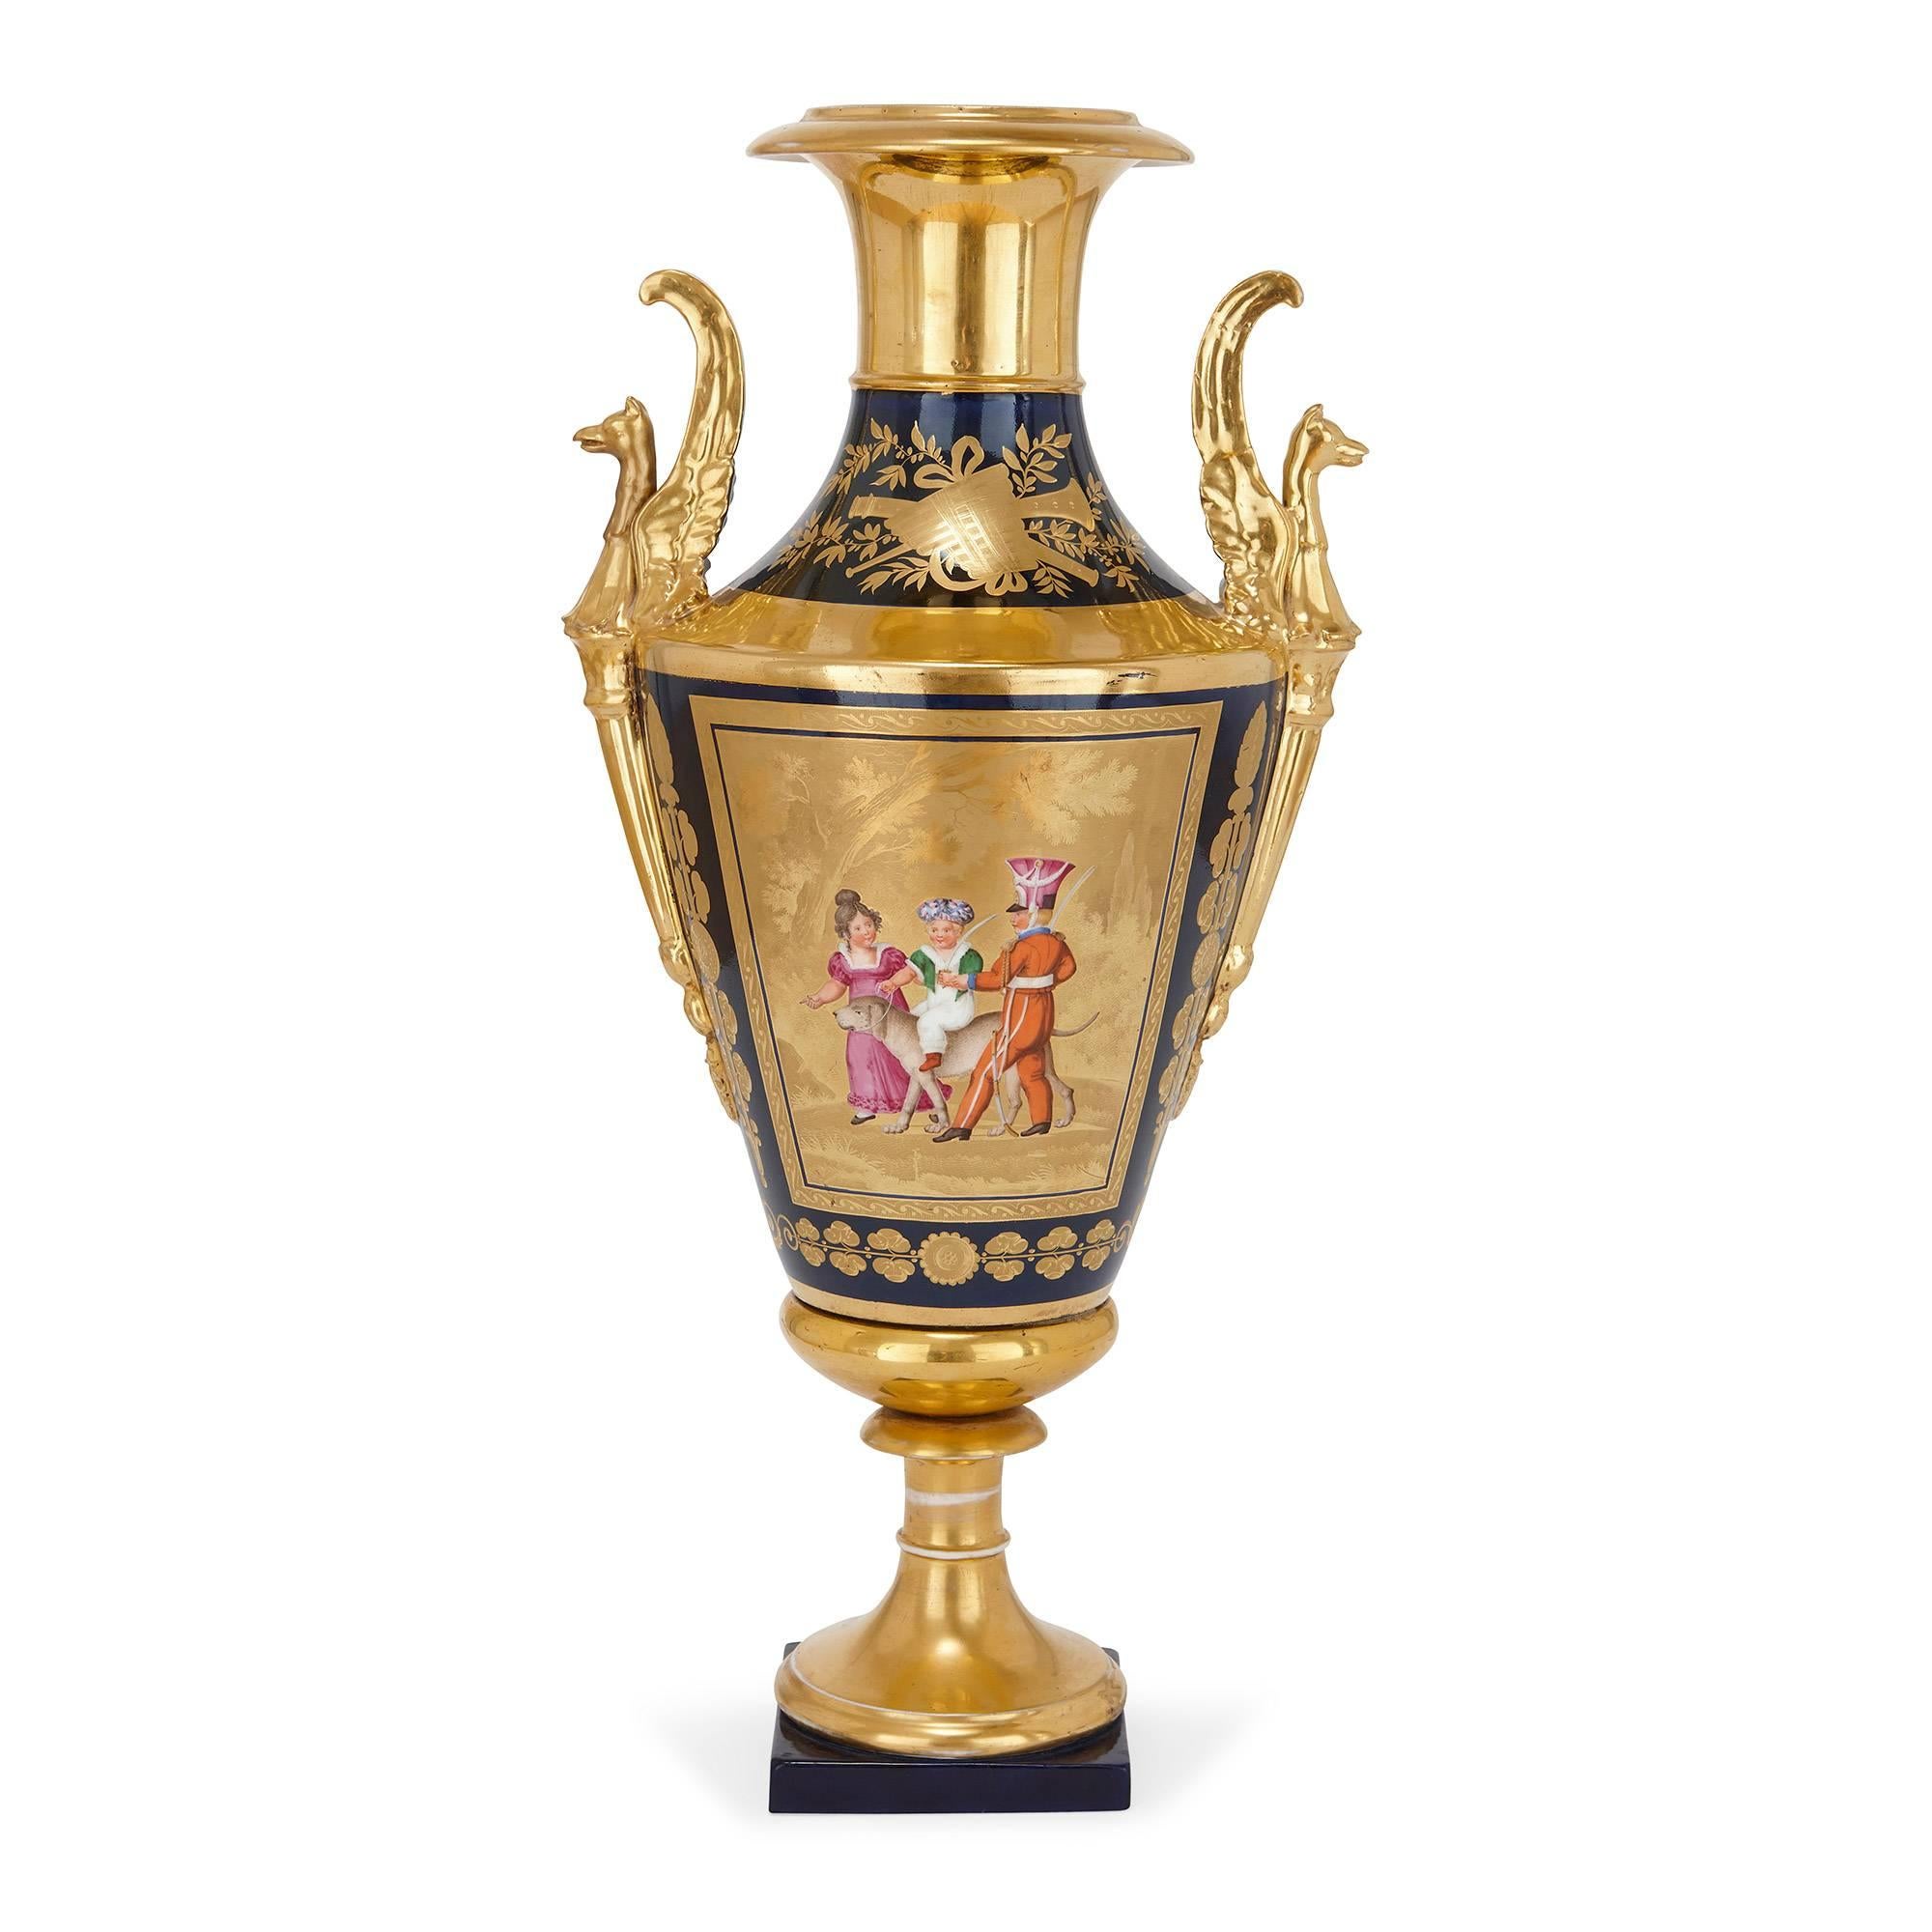 Of conical shape with retracted neck and griffin handles, the 'fond lapis' parcel-gilt and painted surface depicting on one side a colourful scene with children and on the other a bouquet of flowers, with a cobalt blue ground with gold leaf borders